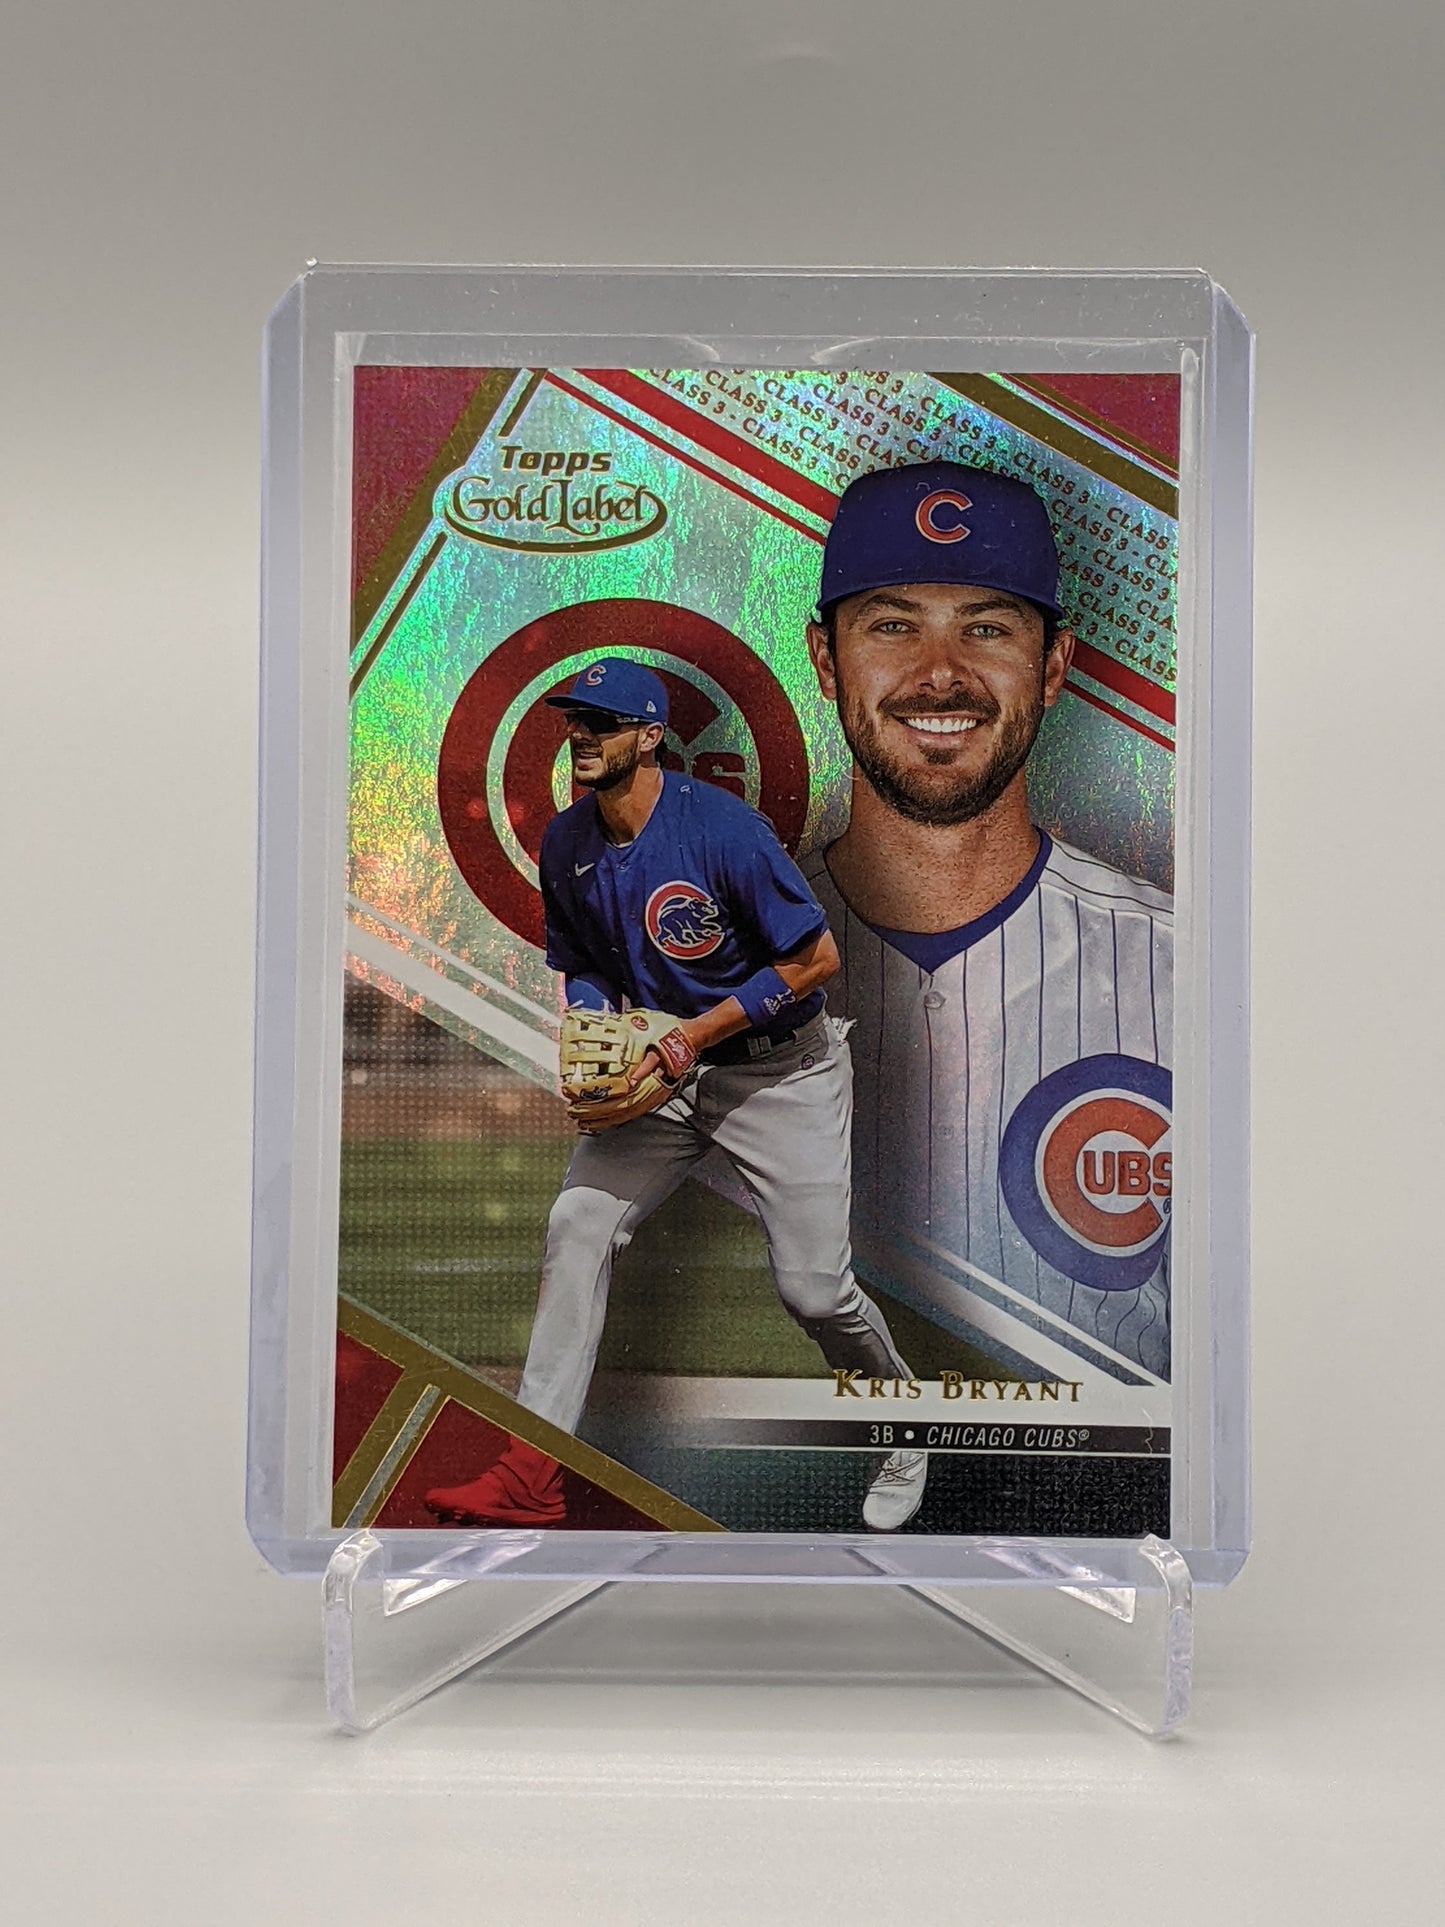 2021 Topps Gold Label Class 3 Red Kris Bryant #/25 Cubs